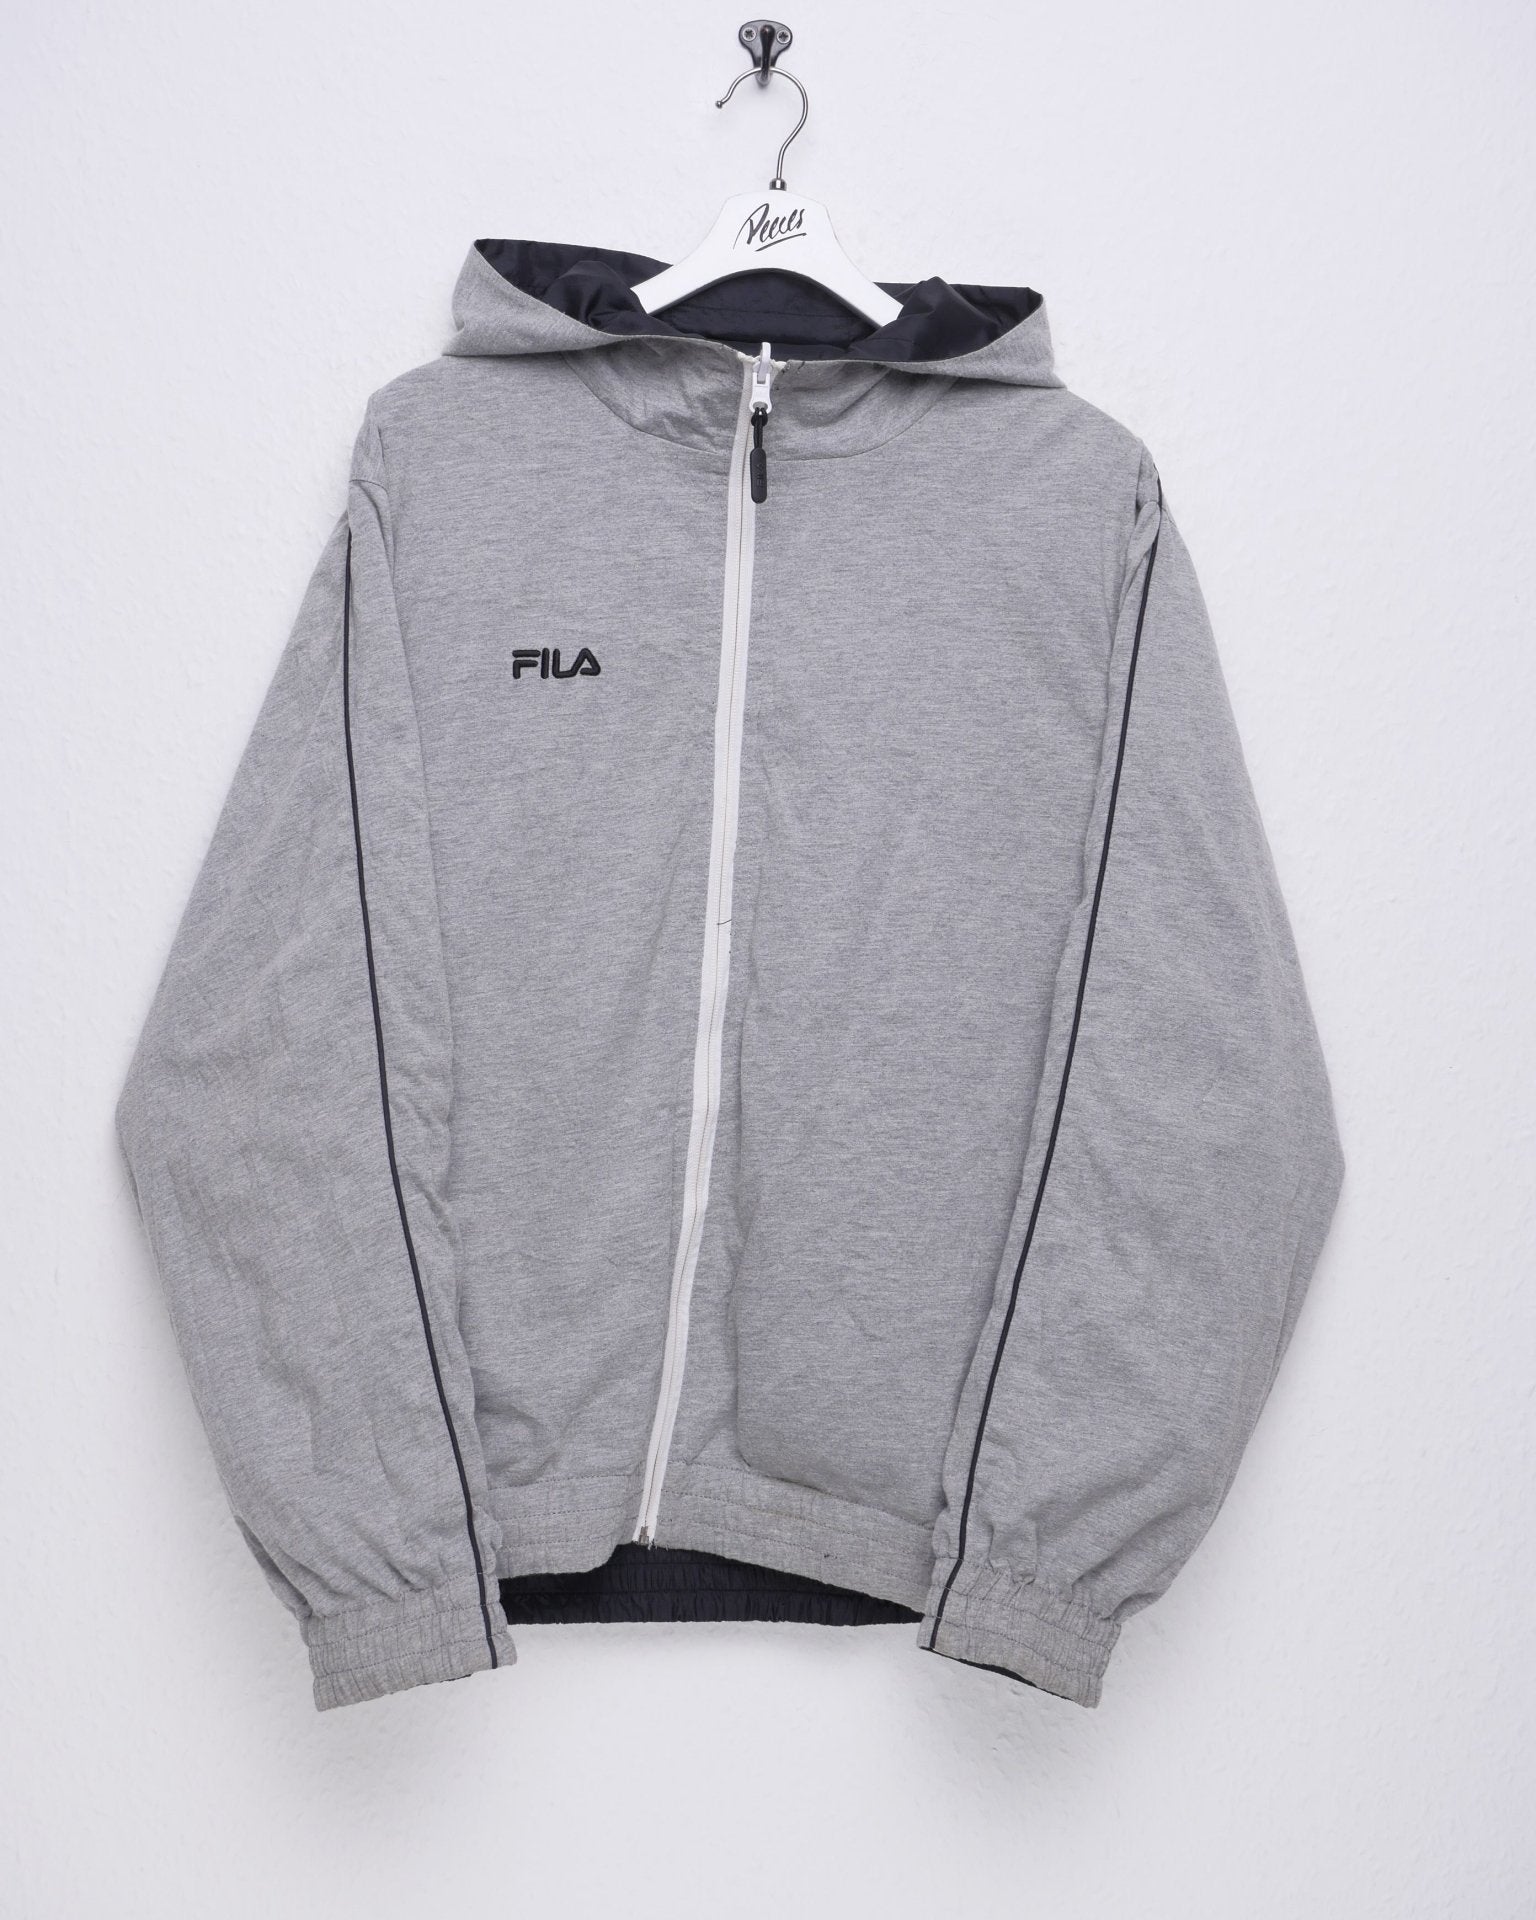 Fila embroidered Spellout Vintage reversible Jacke - Peeces